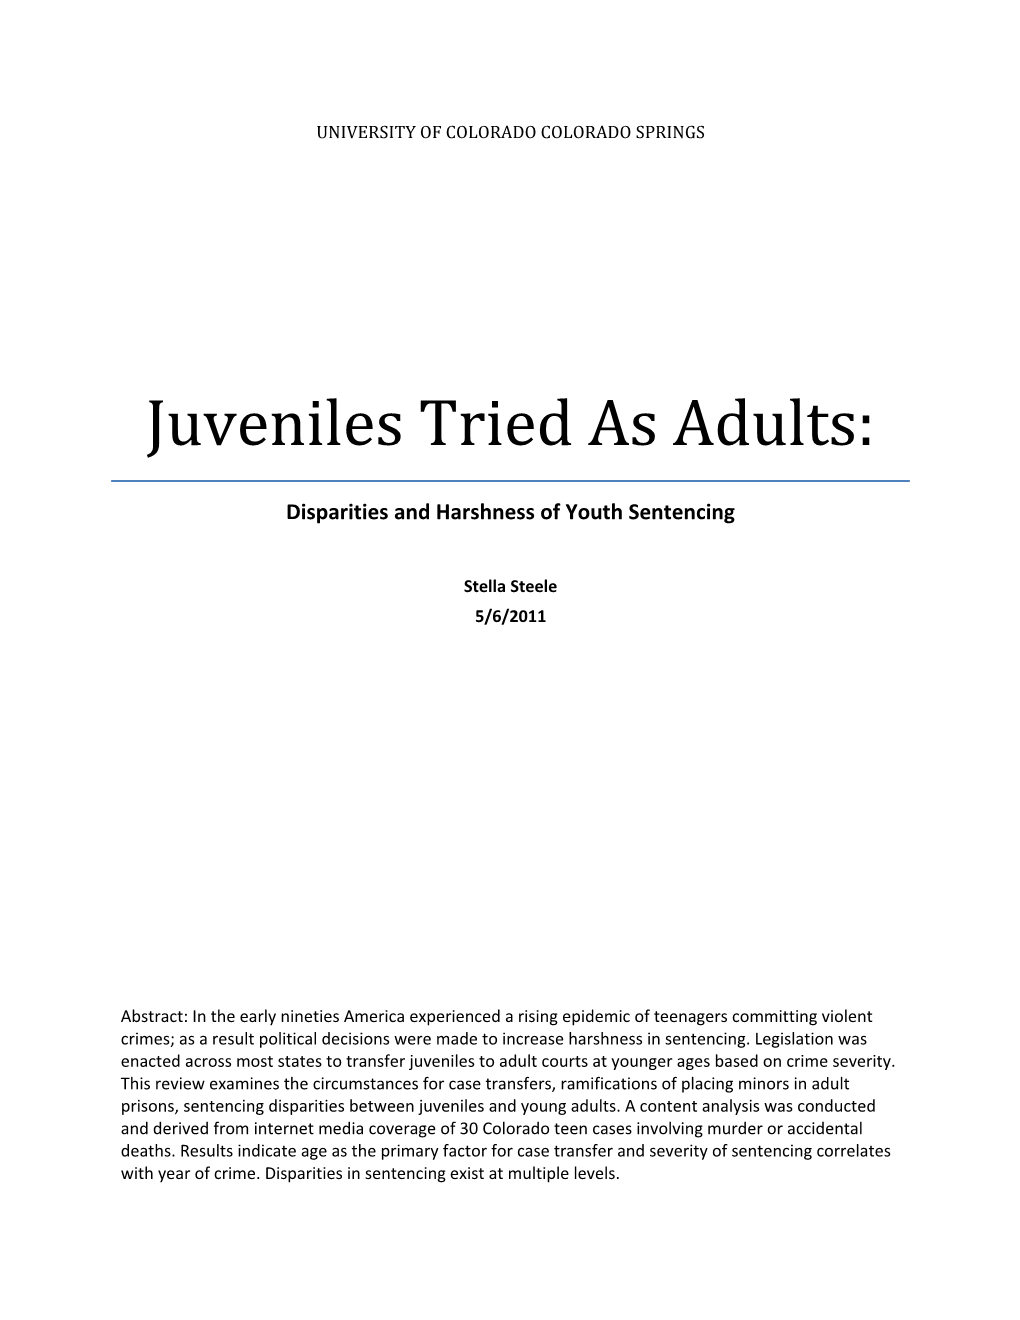 Juveniles Tried As Adults